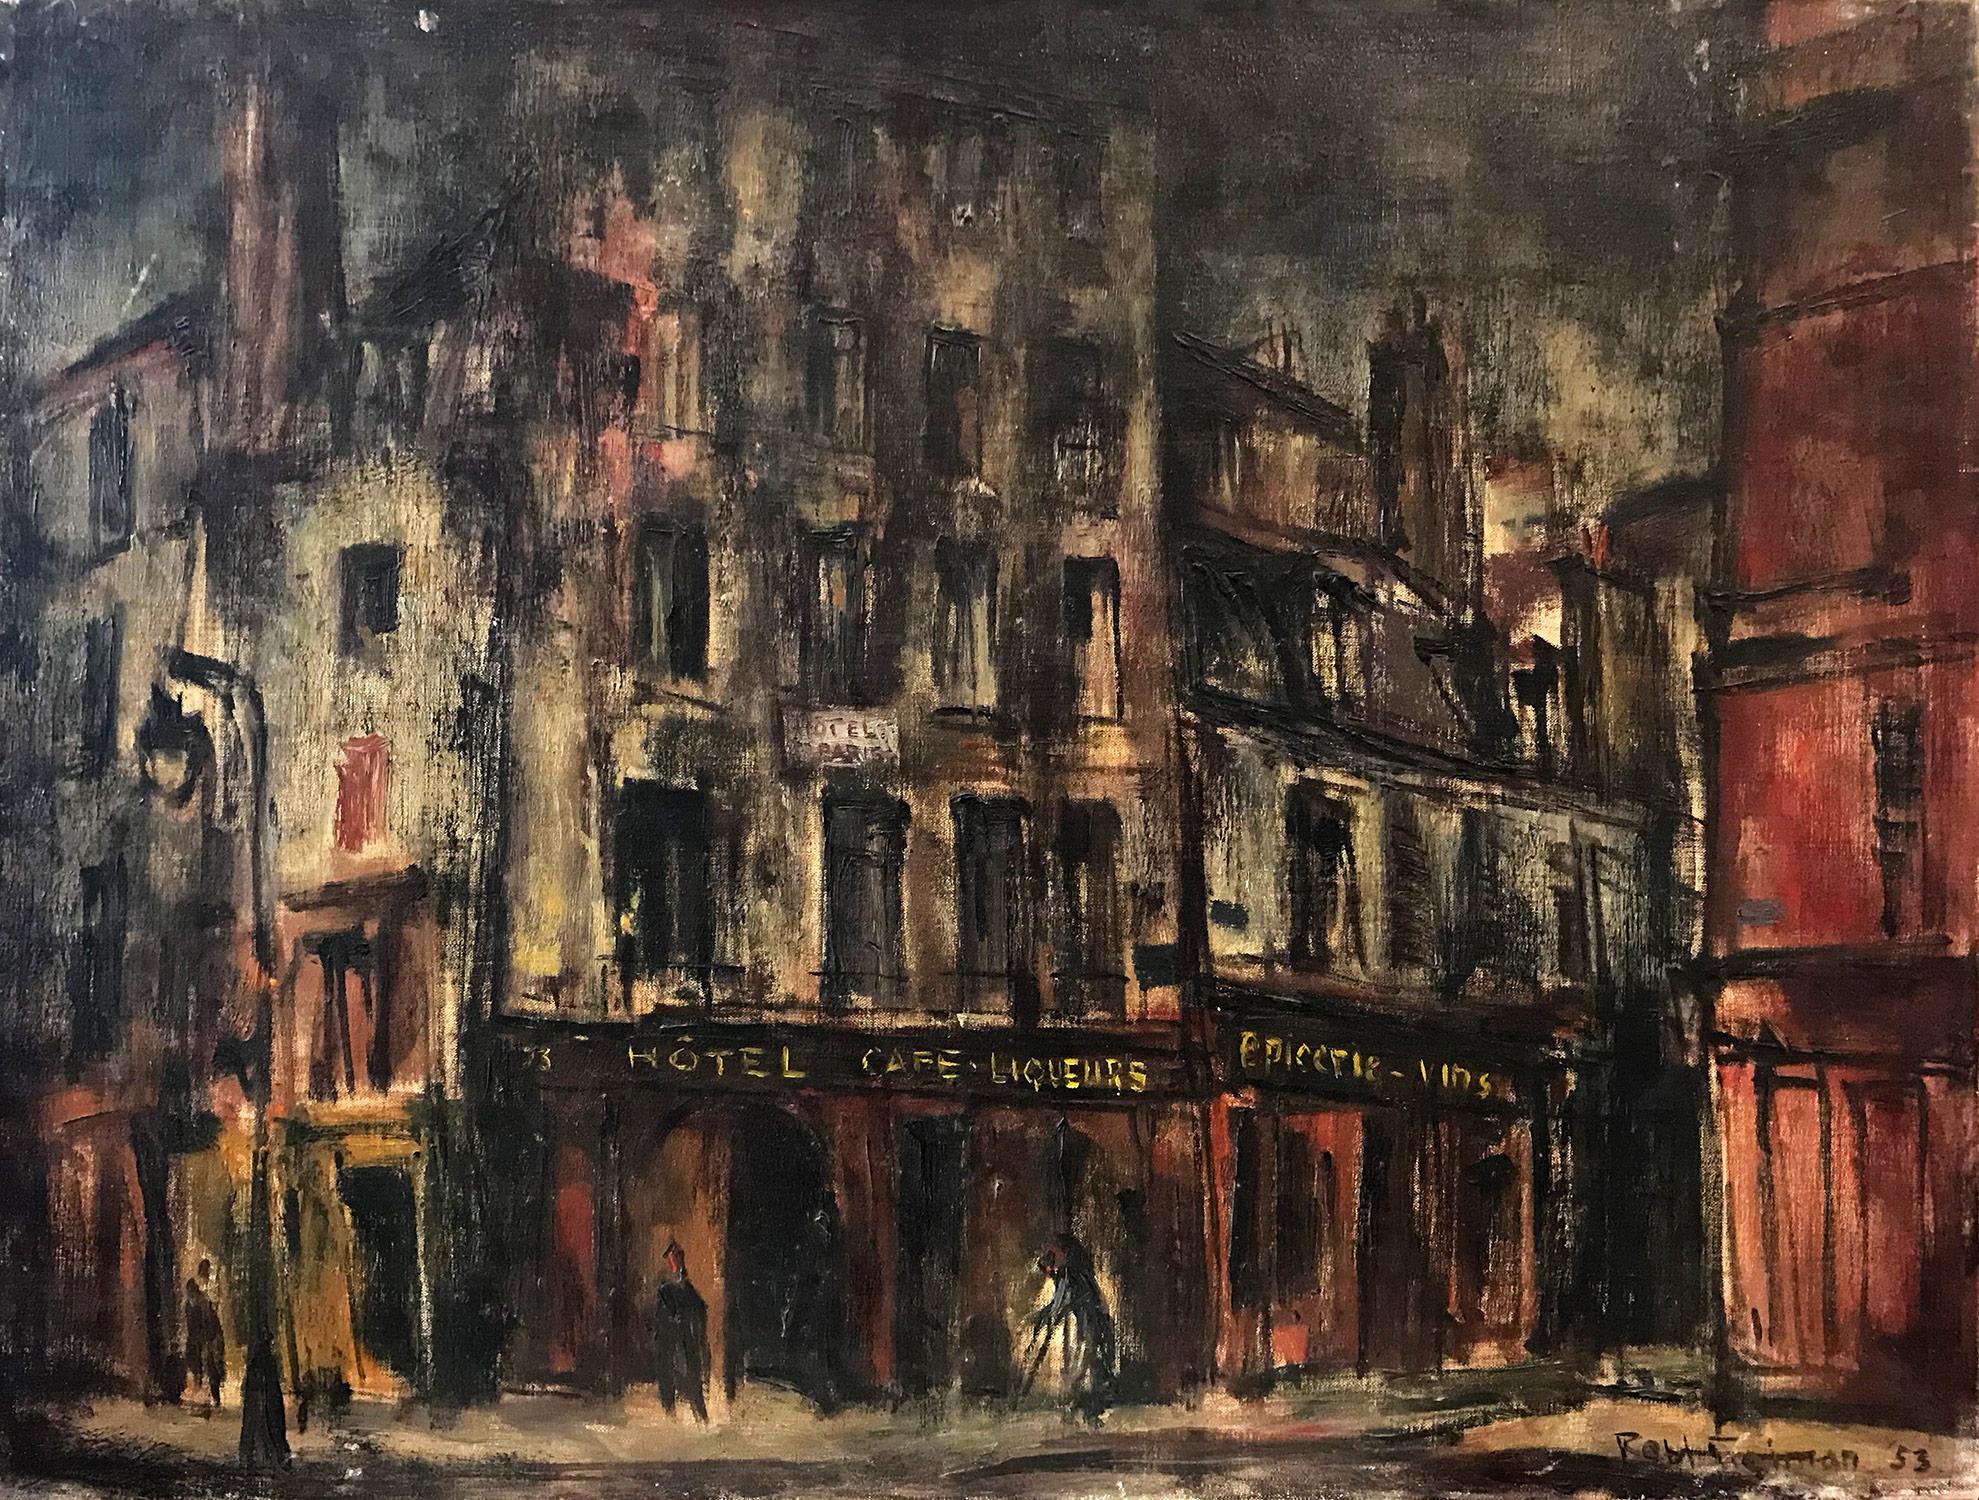 Robert Freiman Landscape Painting - "Hotel Paris" Mid Century Abstract Expressionist Oil Painting on Canvas 